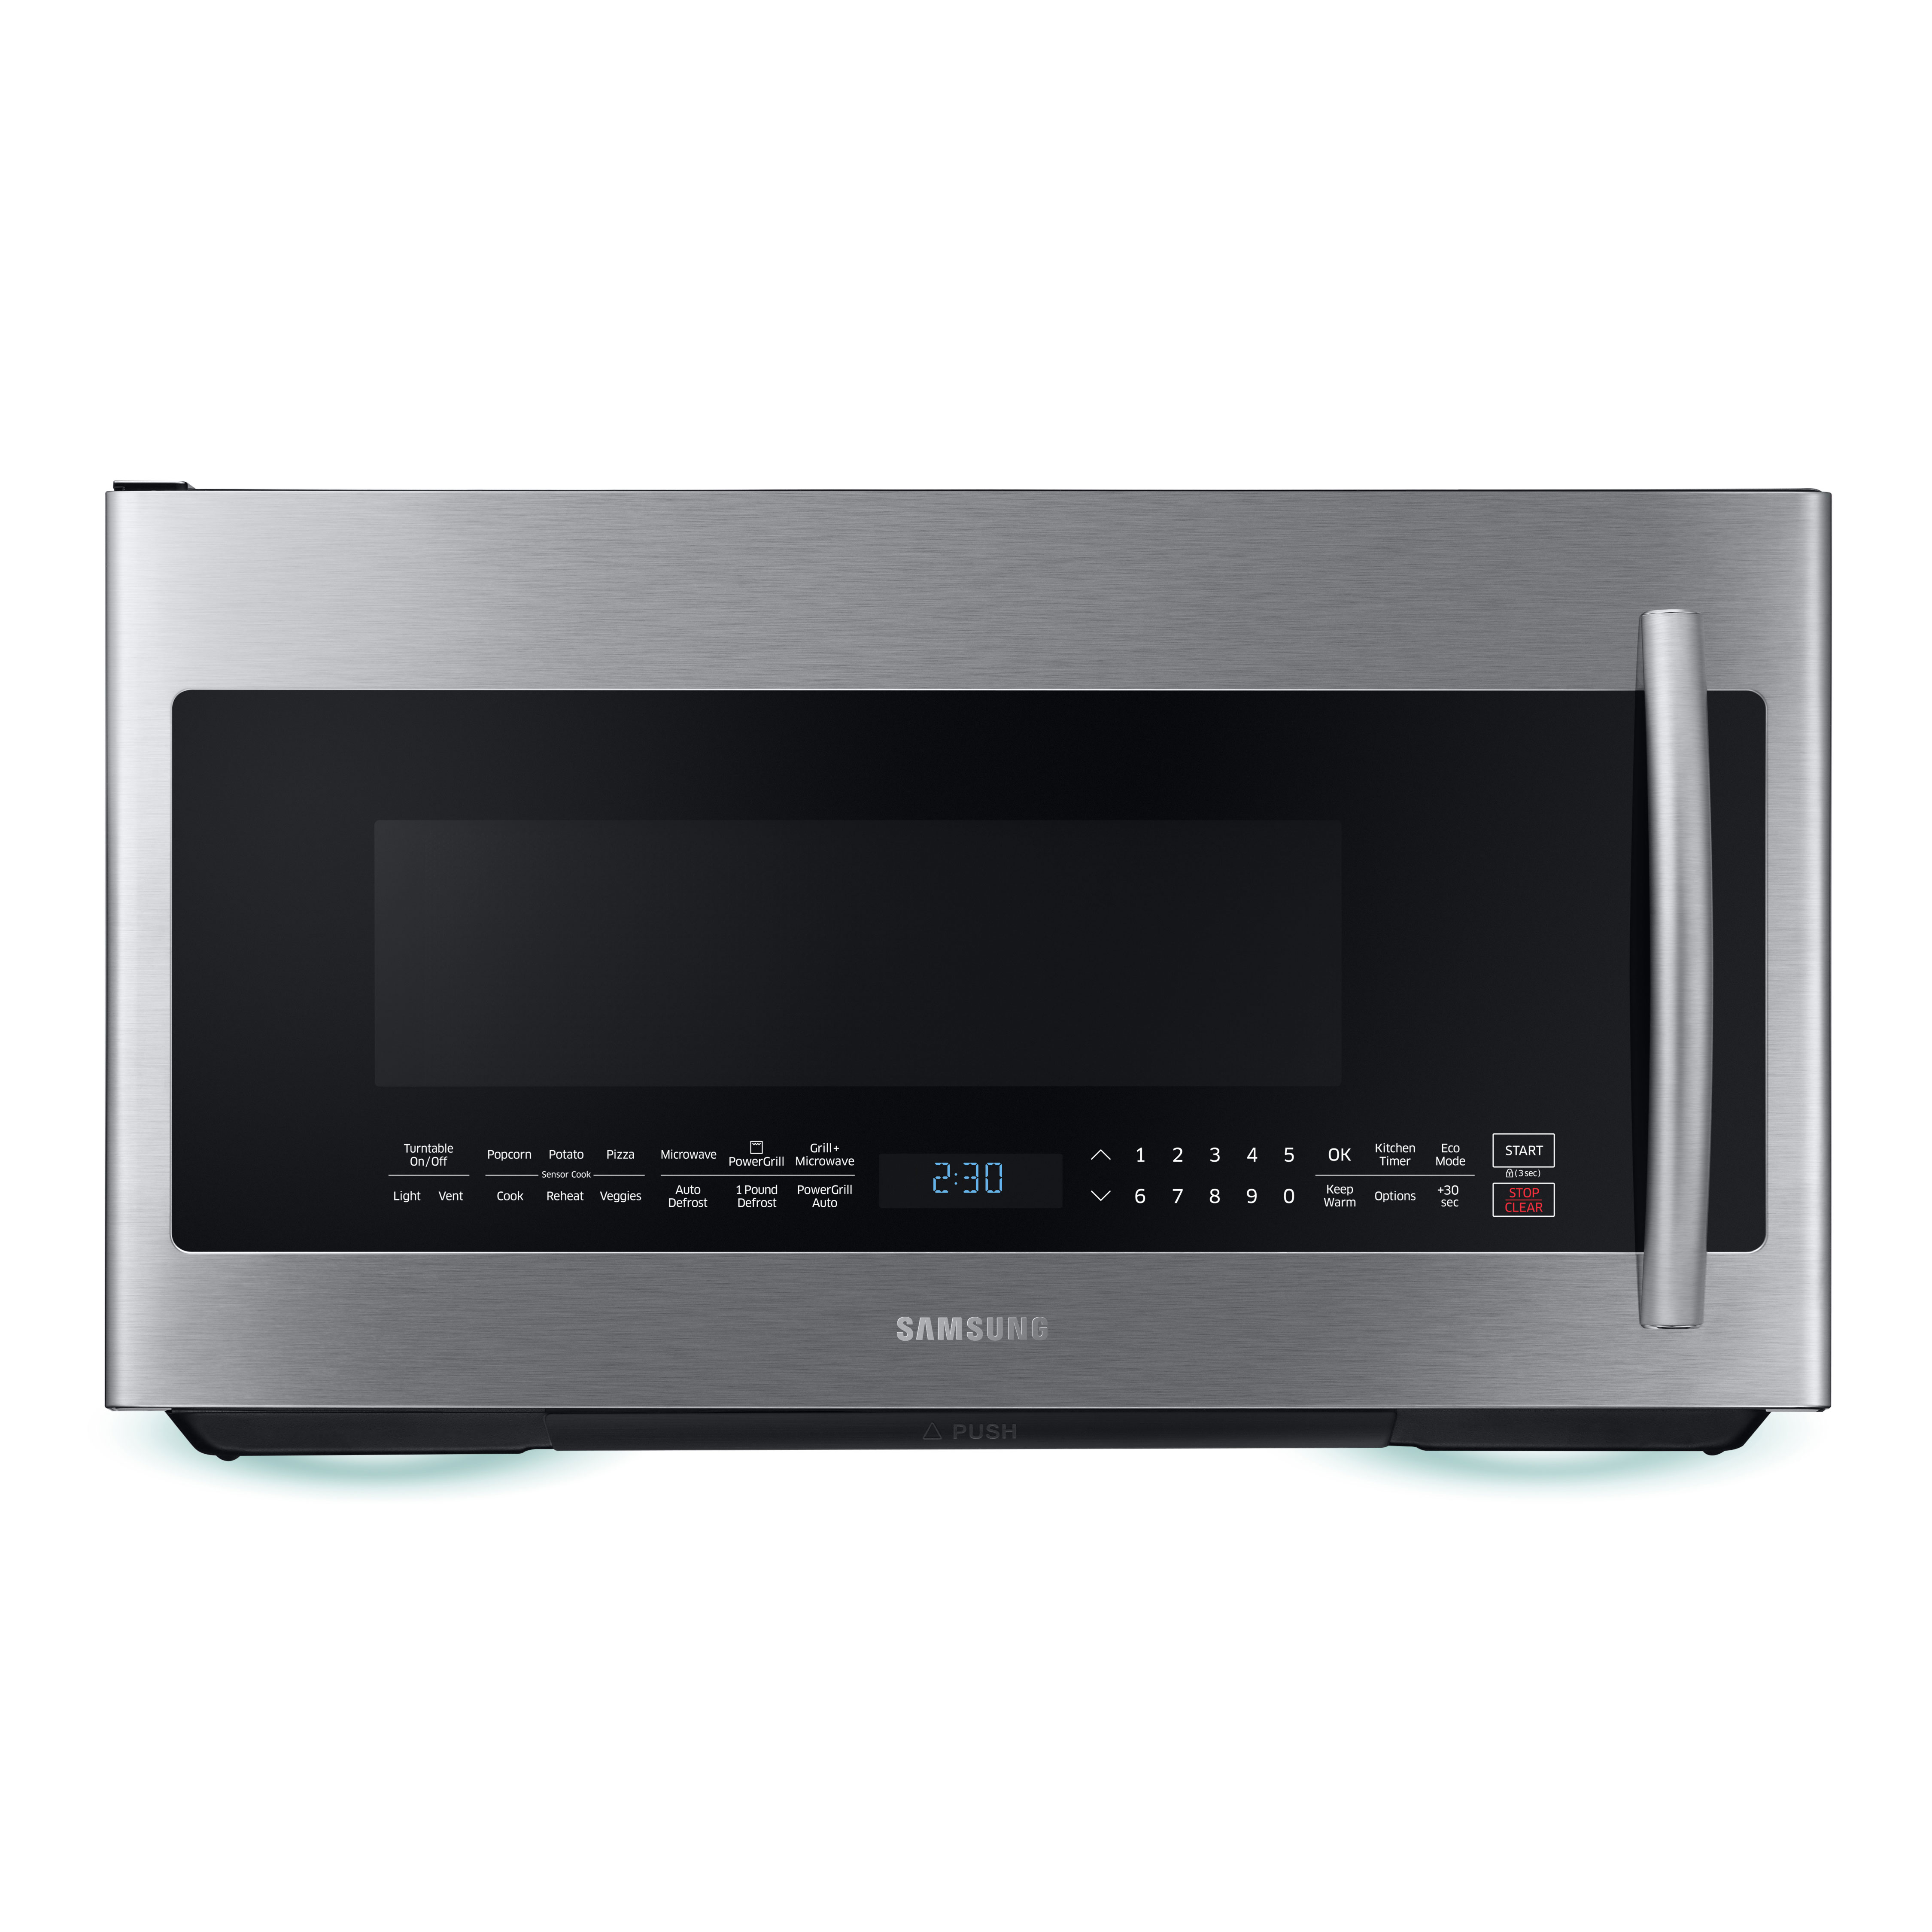 Samsung ME21K7010DS/A2 2.1 cu. ft. Over the Range Microwave w/ PowerGrill and Ceramic Enamel Interior - Stainless Steel